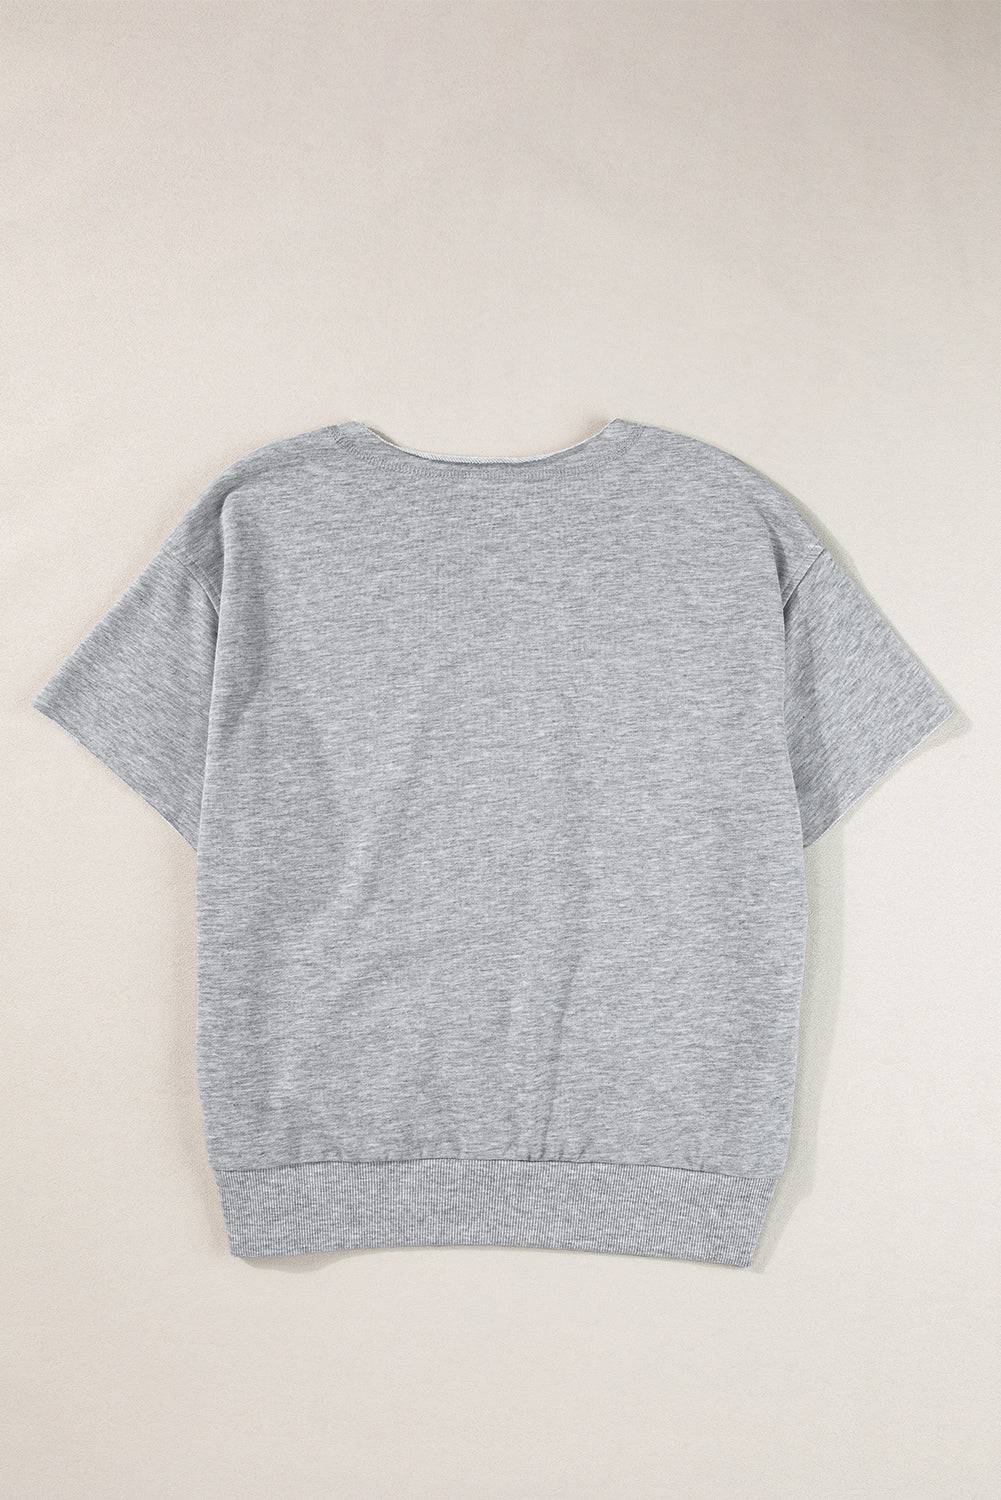 a grey sweater hanging on a white wall